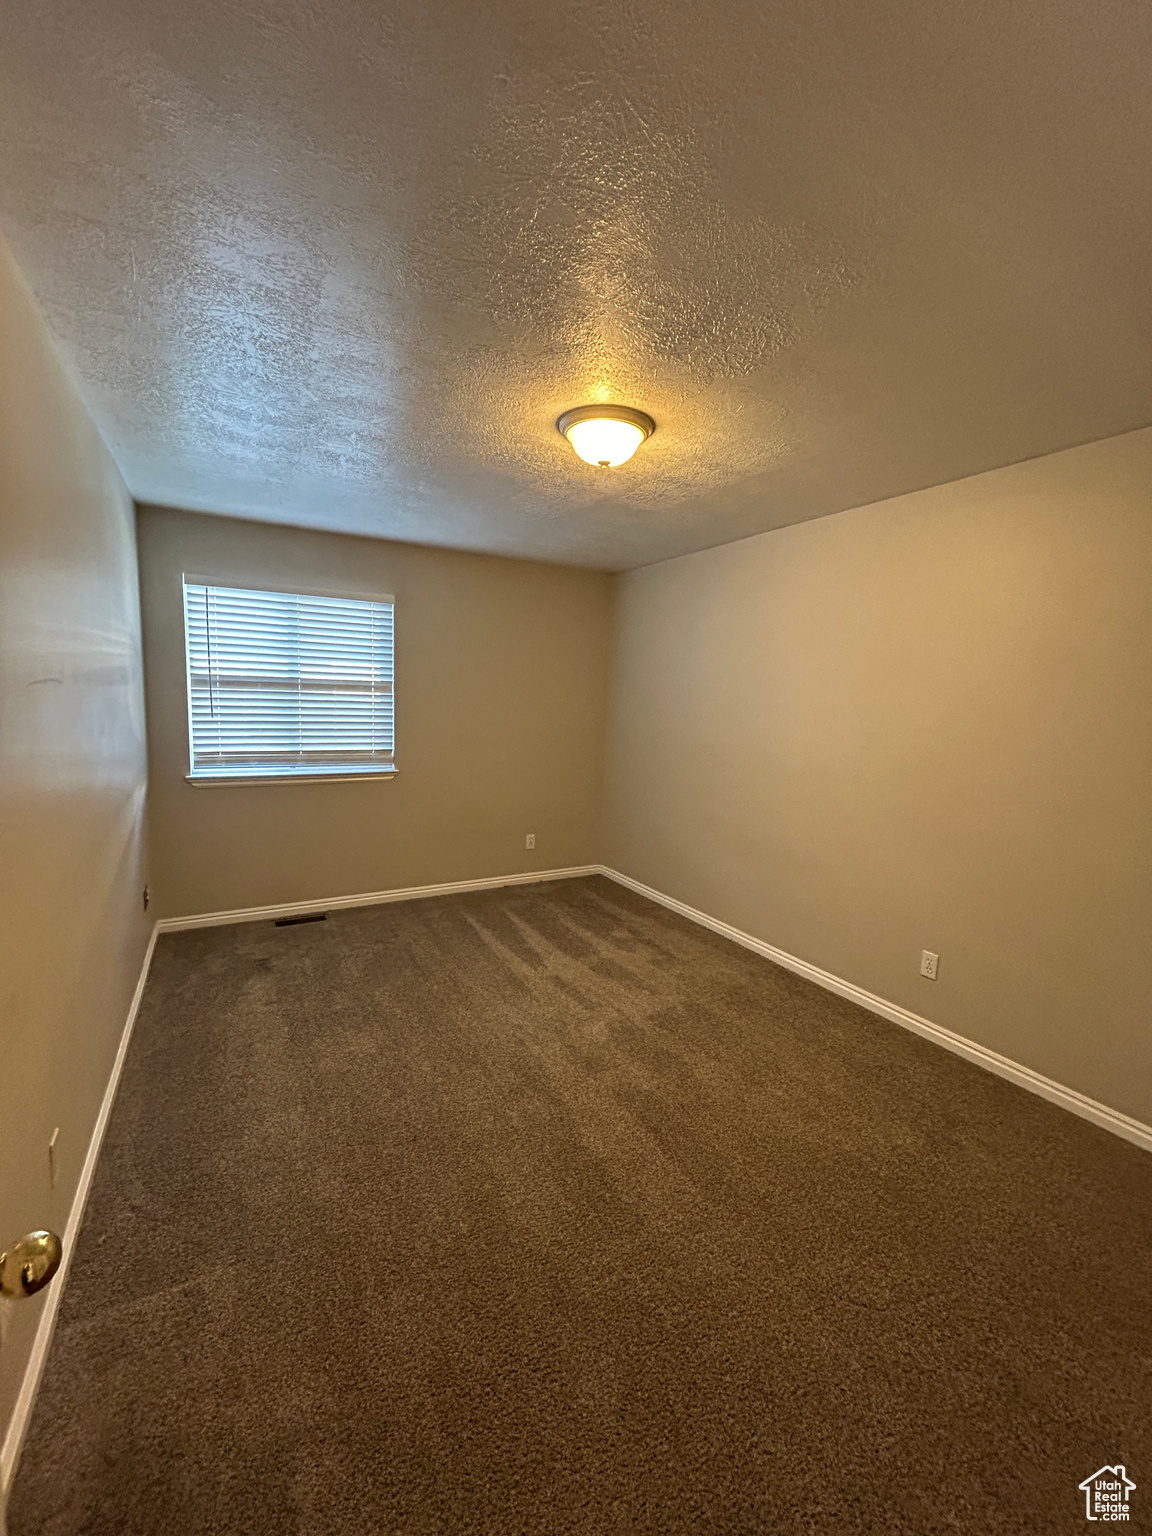 2nd Bedroom room featuring carpet flooring and a textured ceiling